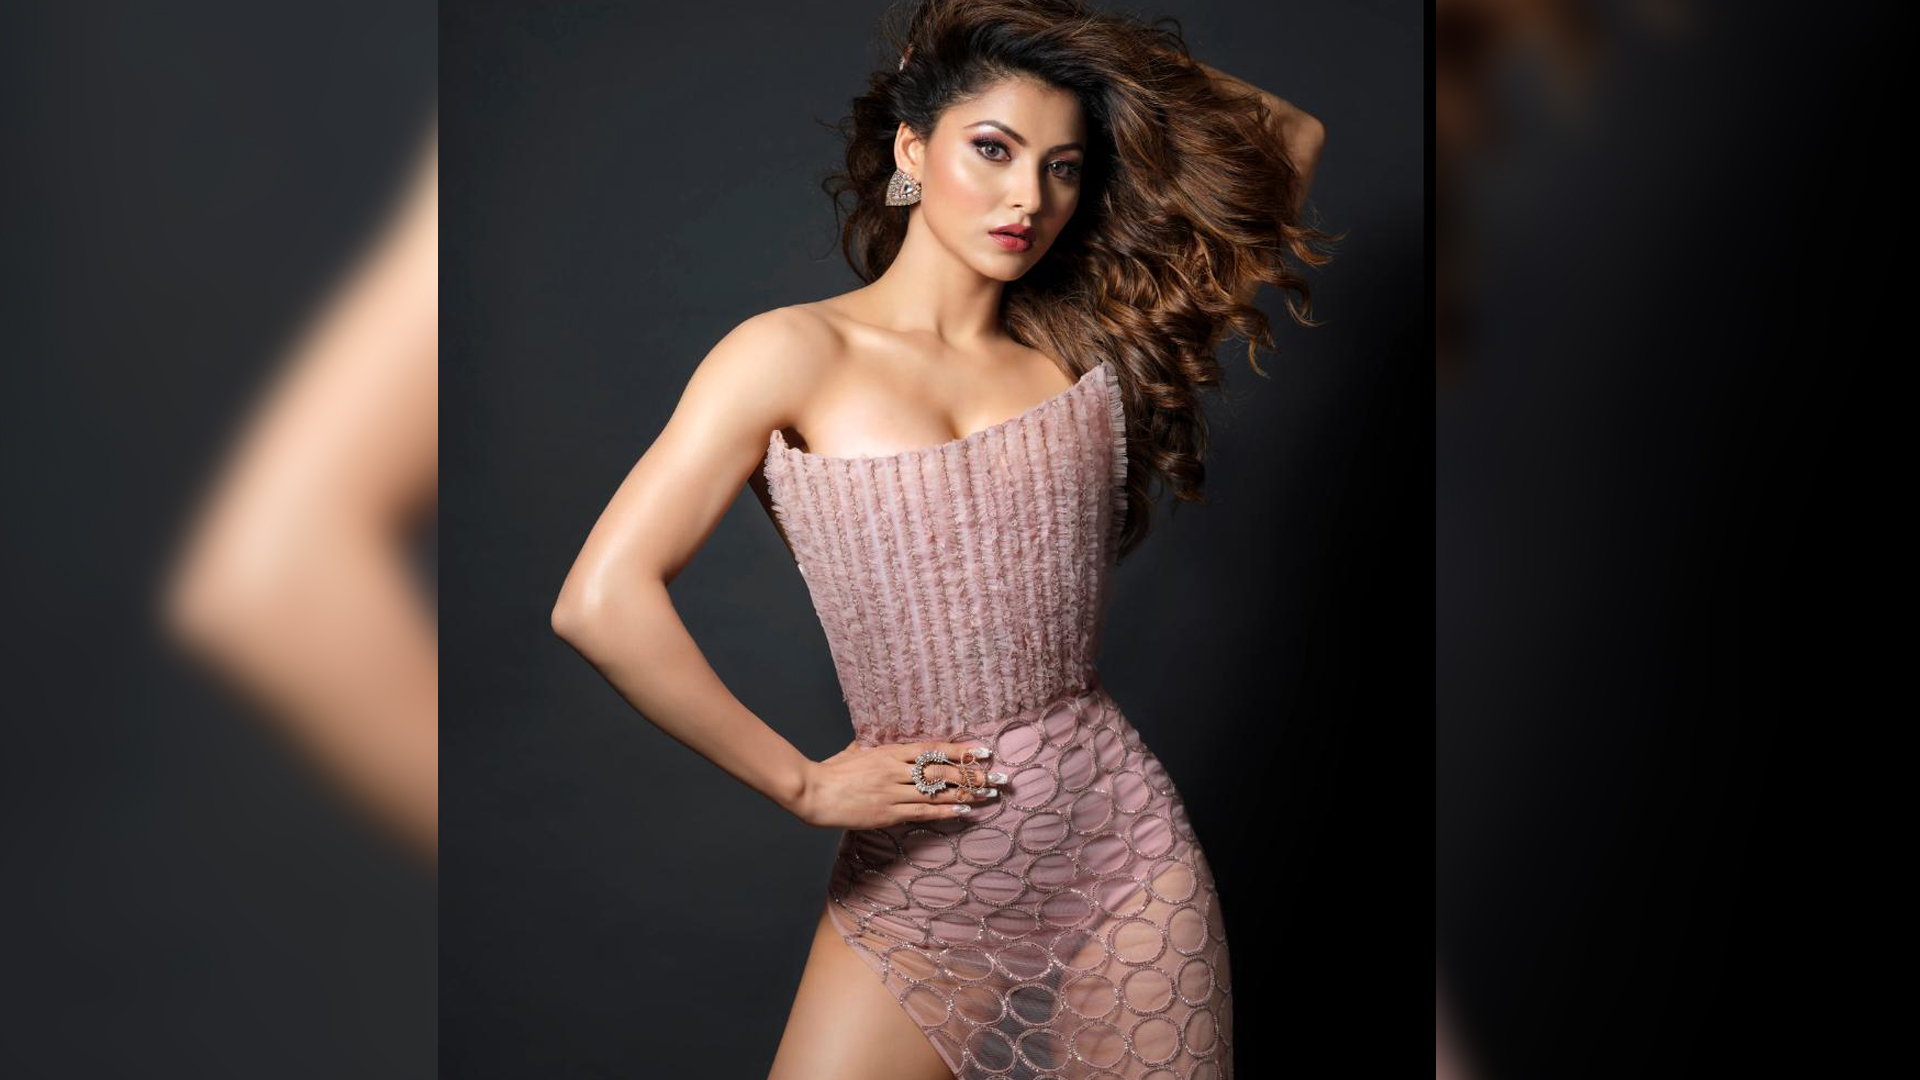 Urvashi Rautela becomes the first Asian actress to have an Instagram filter of her own